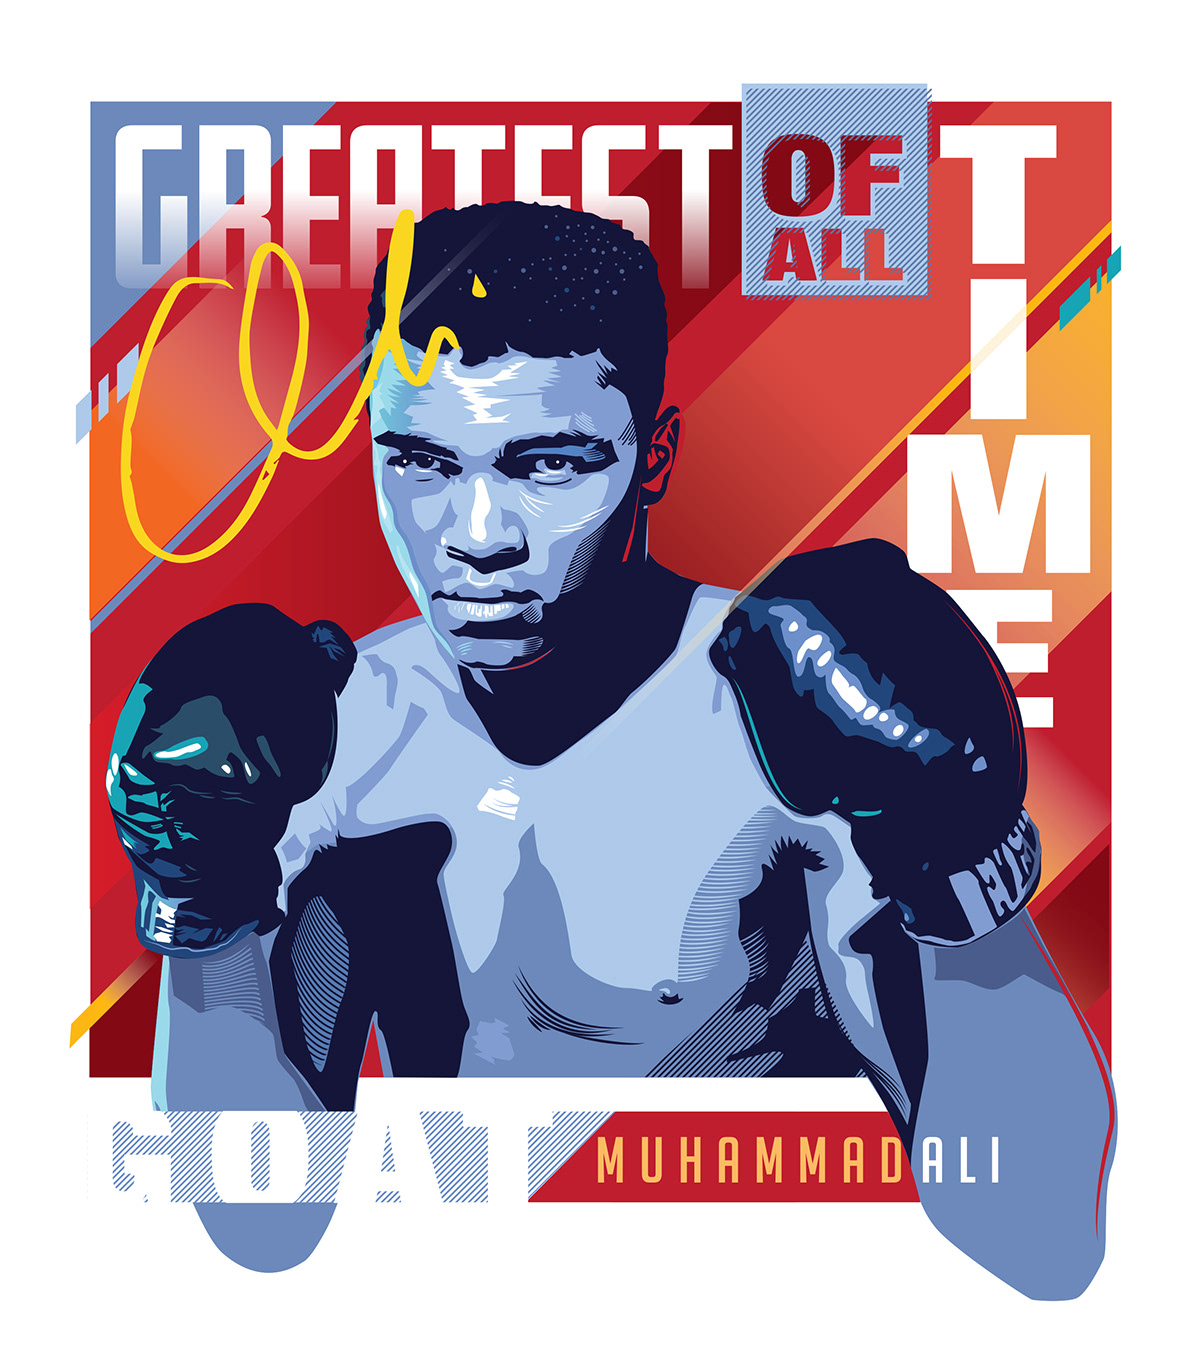 muhammad ali Serena Williams LeBron James roger federer portraits tennis basketball Boxing G.O.A.T. Greatest Of All